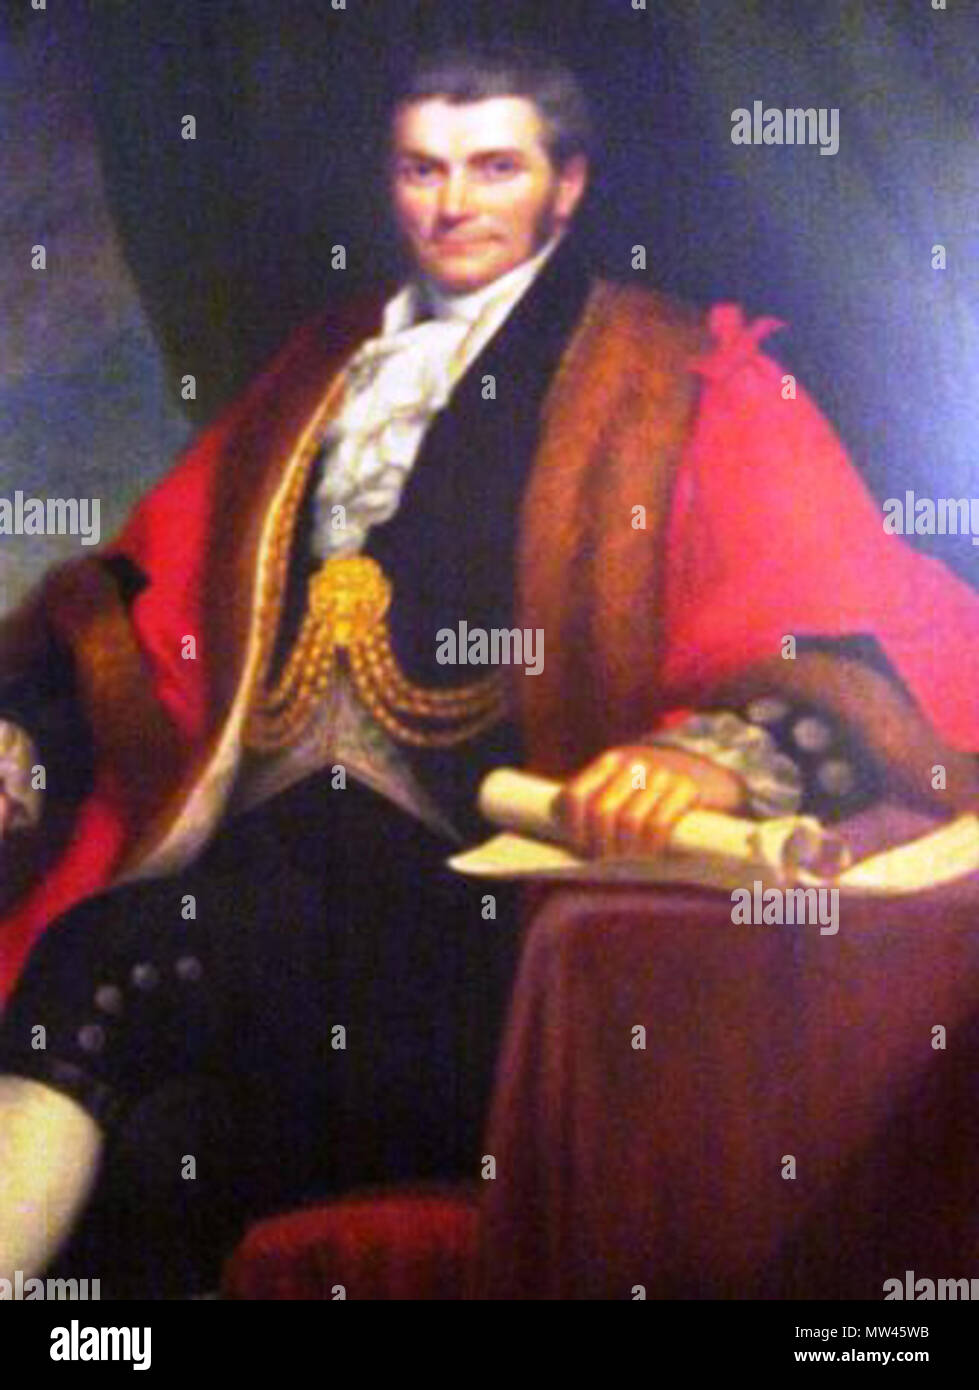 . English: Richard Peek was a tea merchant in Liverpool and Londo - born and died in Devon. In the picture he is shown in his regalia as Sheriff of London. The painting is still in the Peek family. 1833. Unknown 474 Richard Peek, Sheriff of London2 Stock Photo